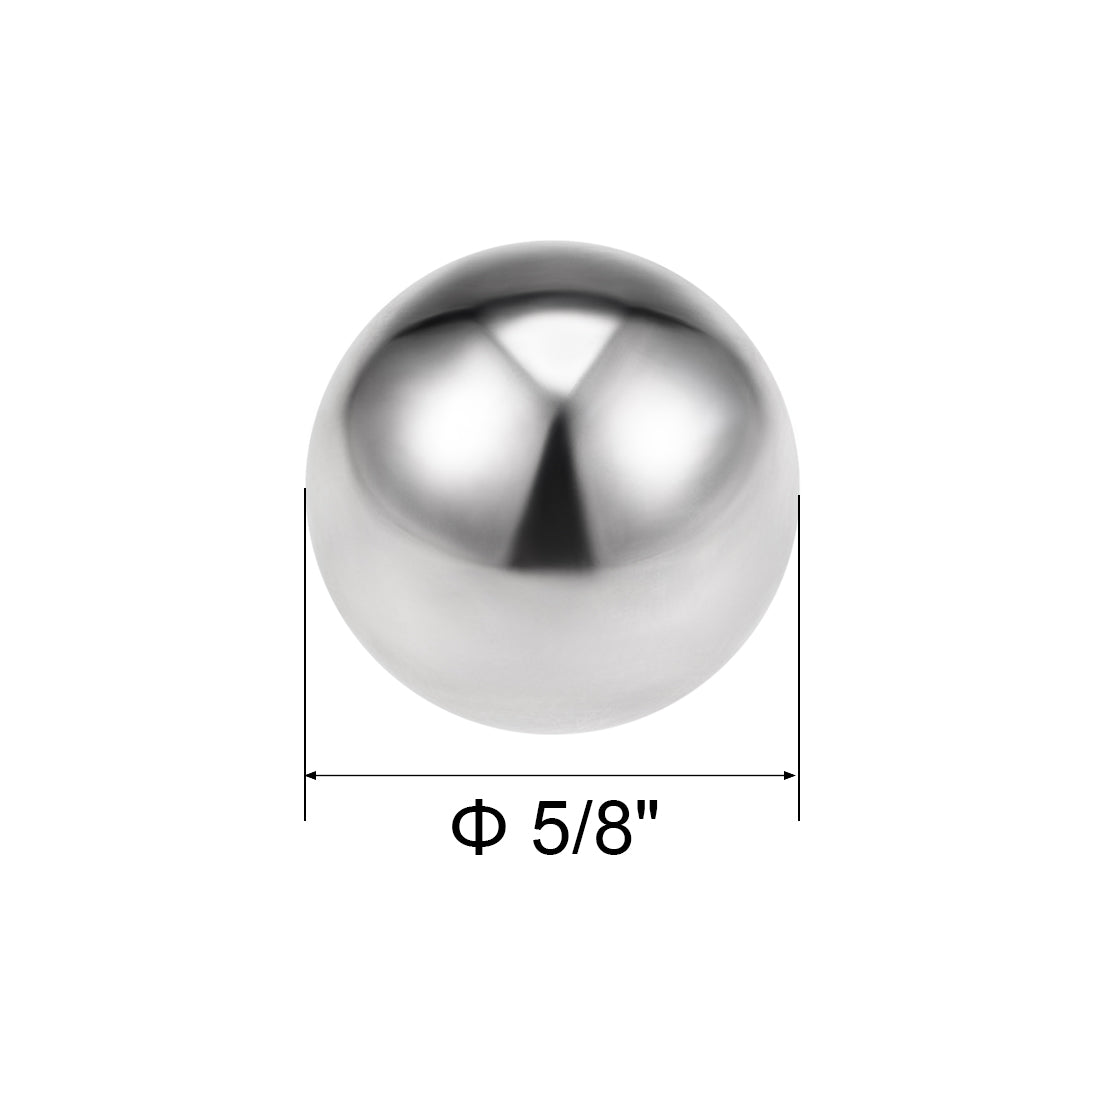 Uxcell Uxcell 5/8" Bearing Balls 316L Stainless Steel G100 Precision Balls 10pcs